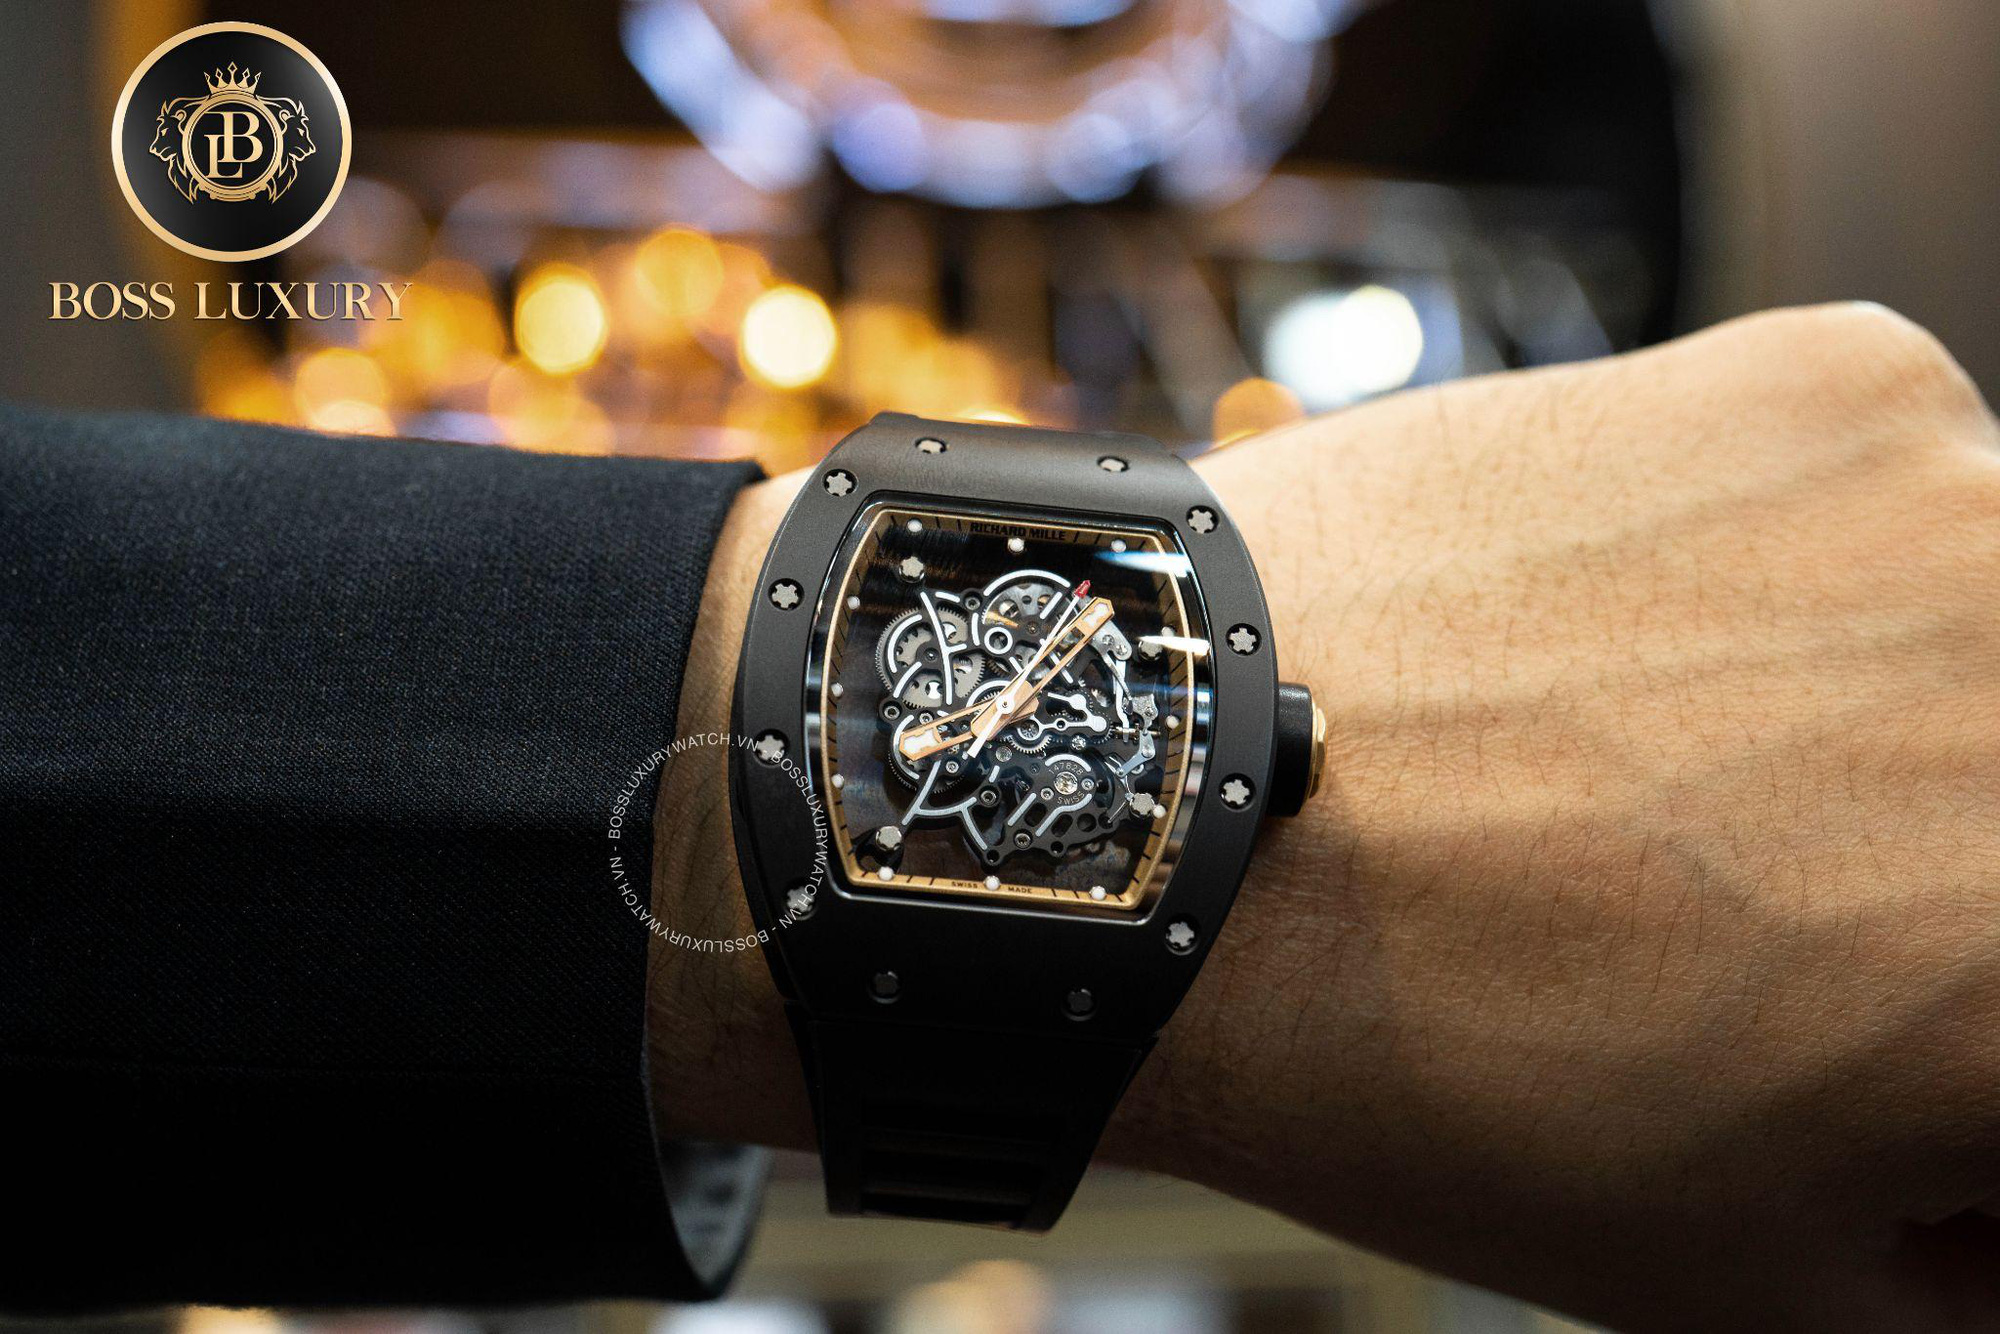 The most sought-after Richard Mille watches at Boss Luxury - Photo 3.